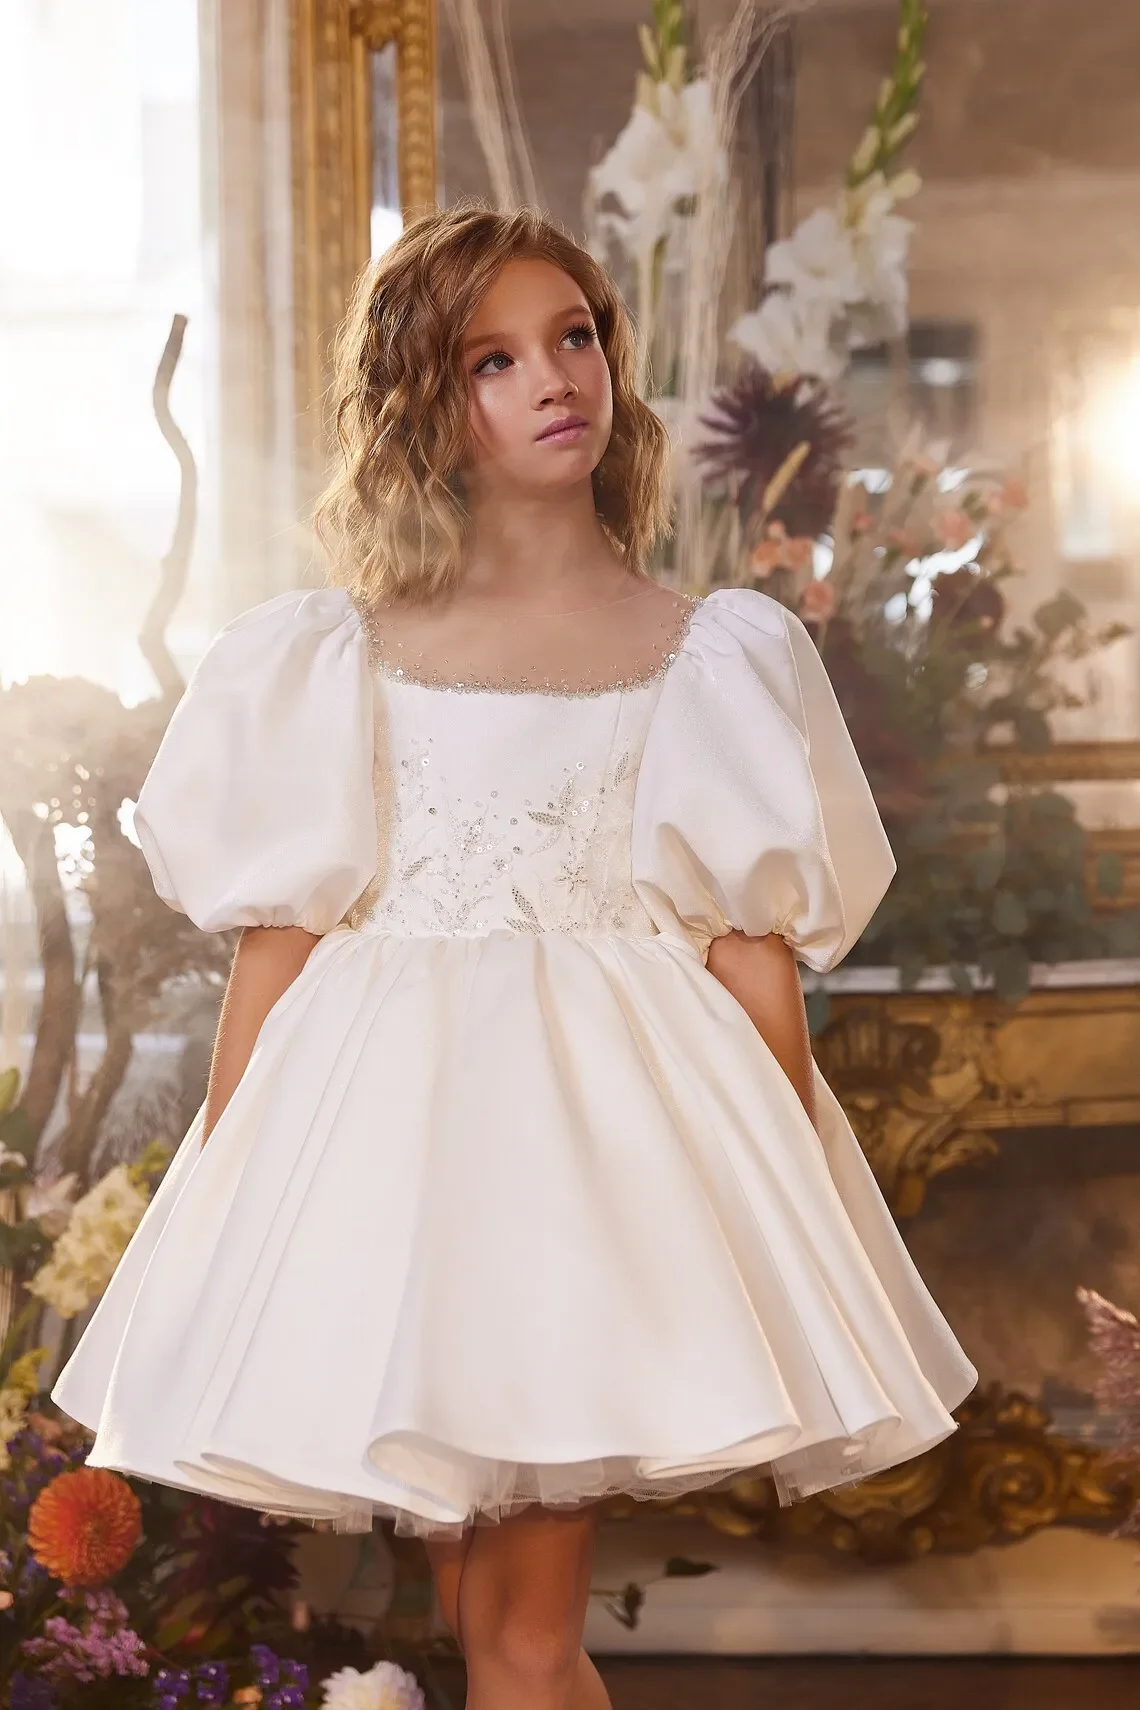 

Ivory Sequins Flower Girl Dress For Wedding Satin Puffy Short Sleeve Knee Length Kids Party Dress First Communion Ball Gown